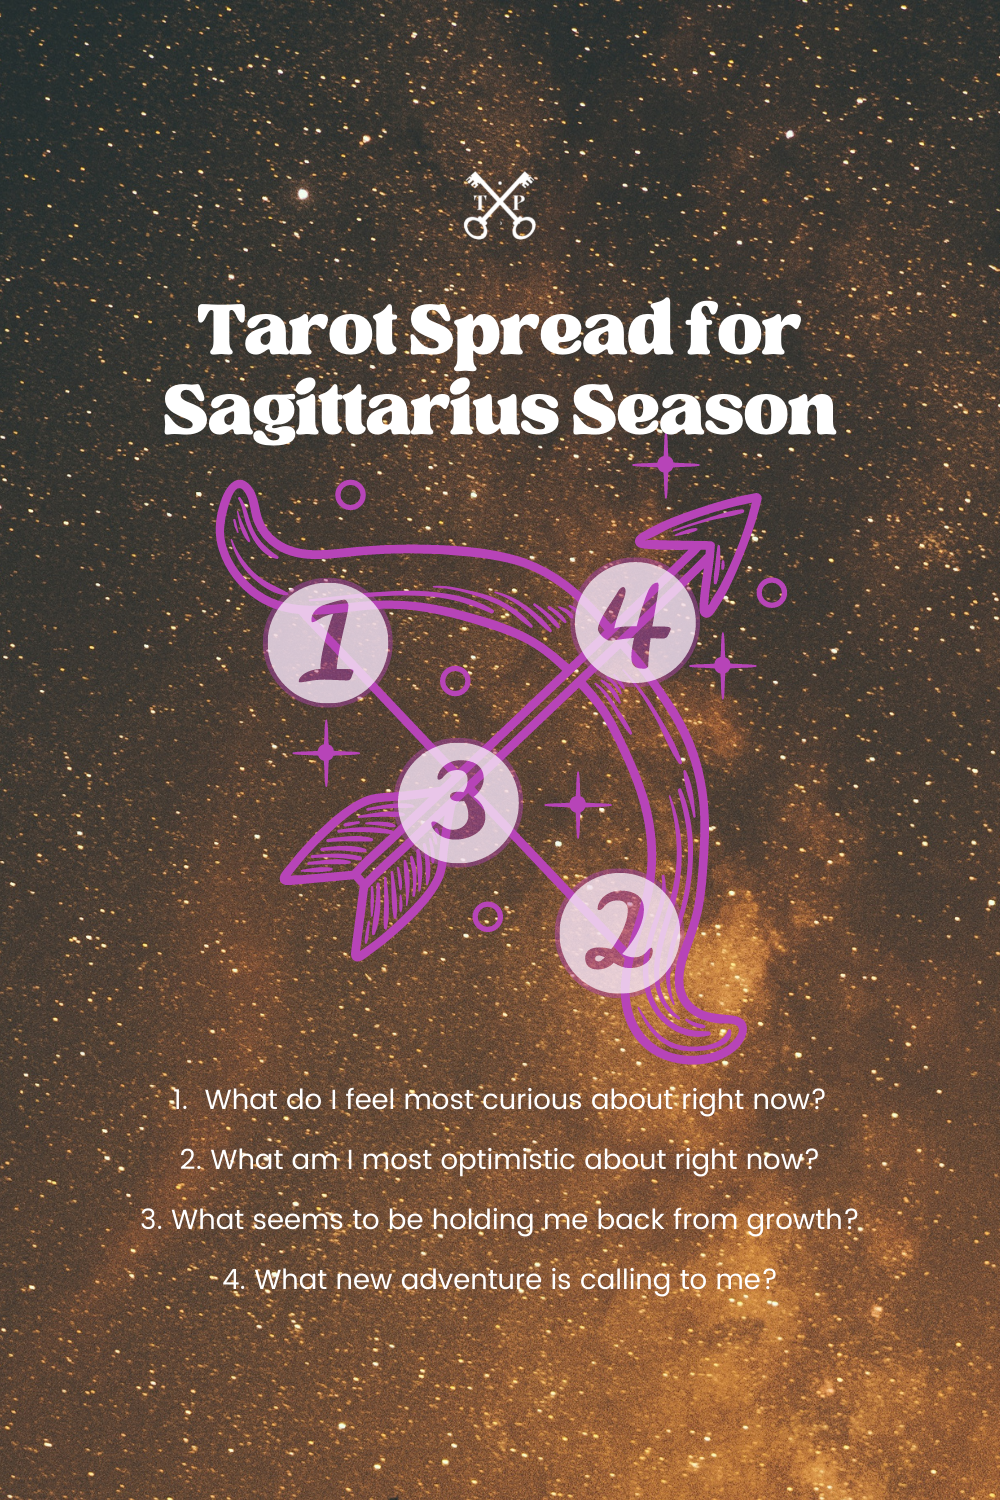 Tarot Spread for Sagittarius Season by The Tarot Professor | Four-card tarot spread in the shape of bow and arrow asks 1. What do I feel most curious? 2. What am I most optimistic about? 3. What seems to be holding me back from growth? 4. What new adventure is calling to me?